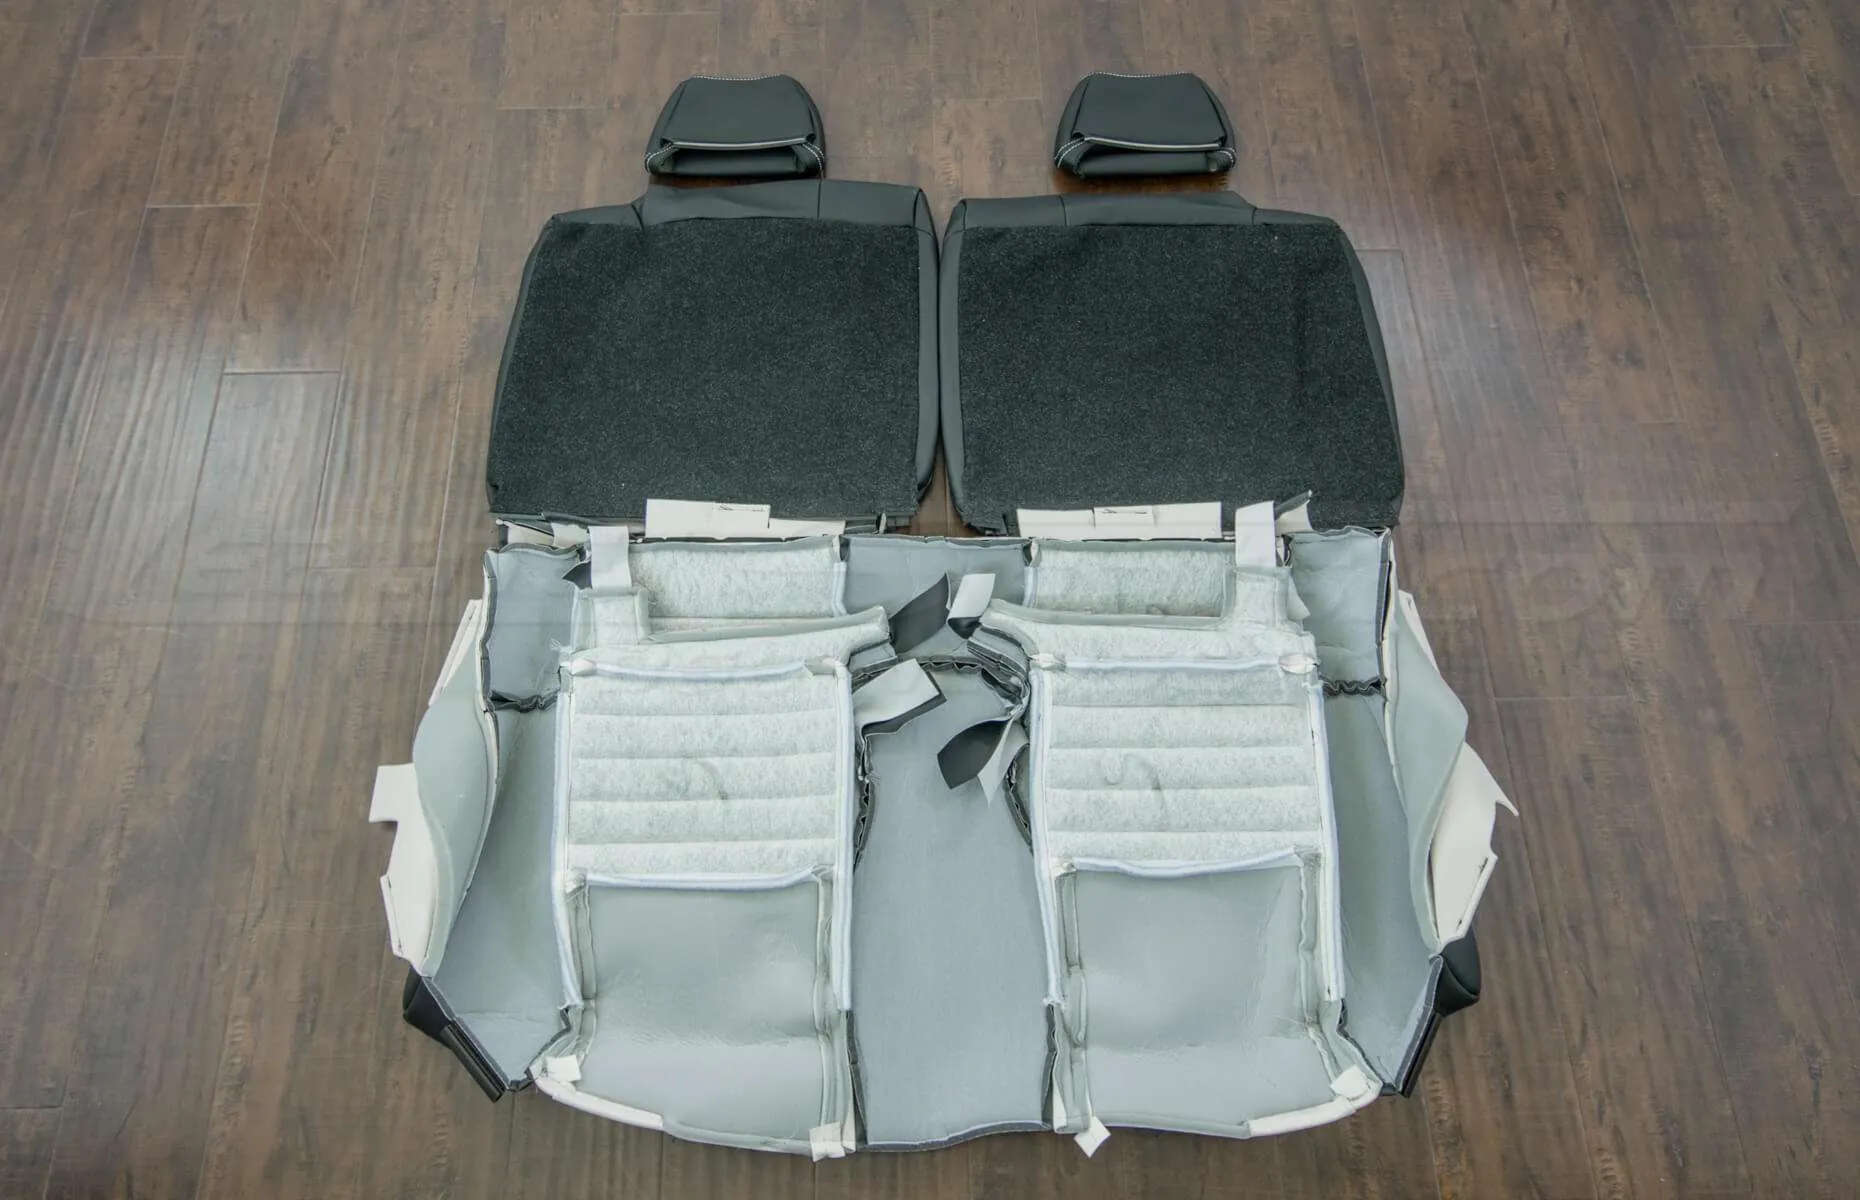 Ford Mustang Upholstery - Black & White - Back view of rear seats